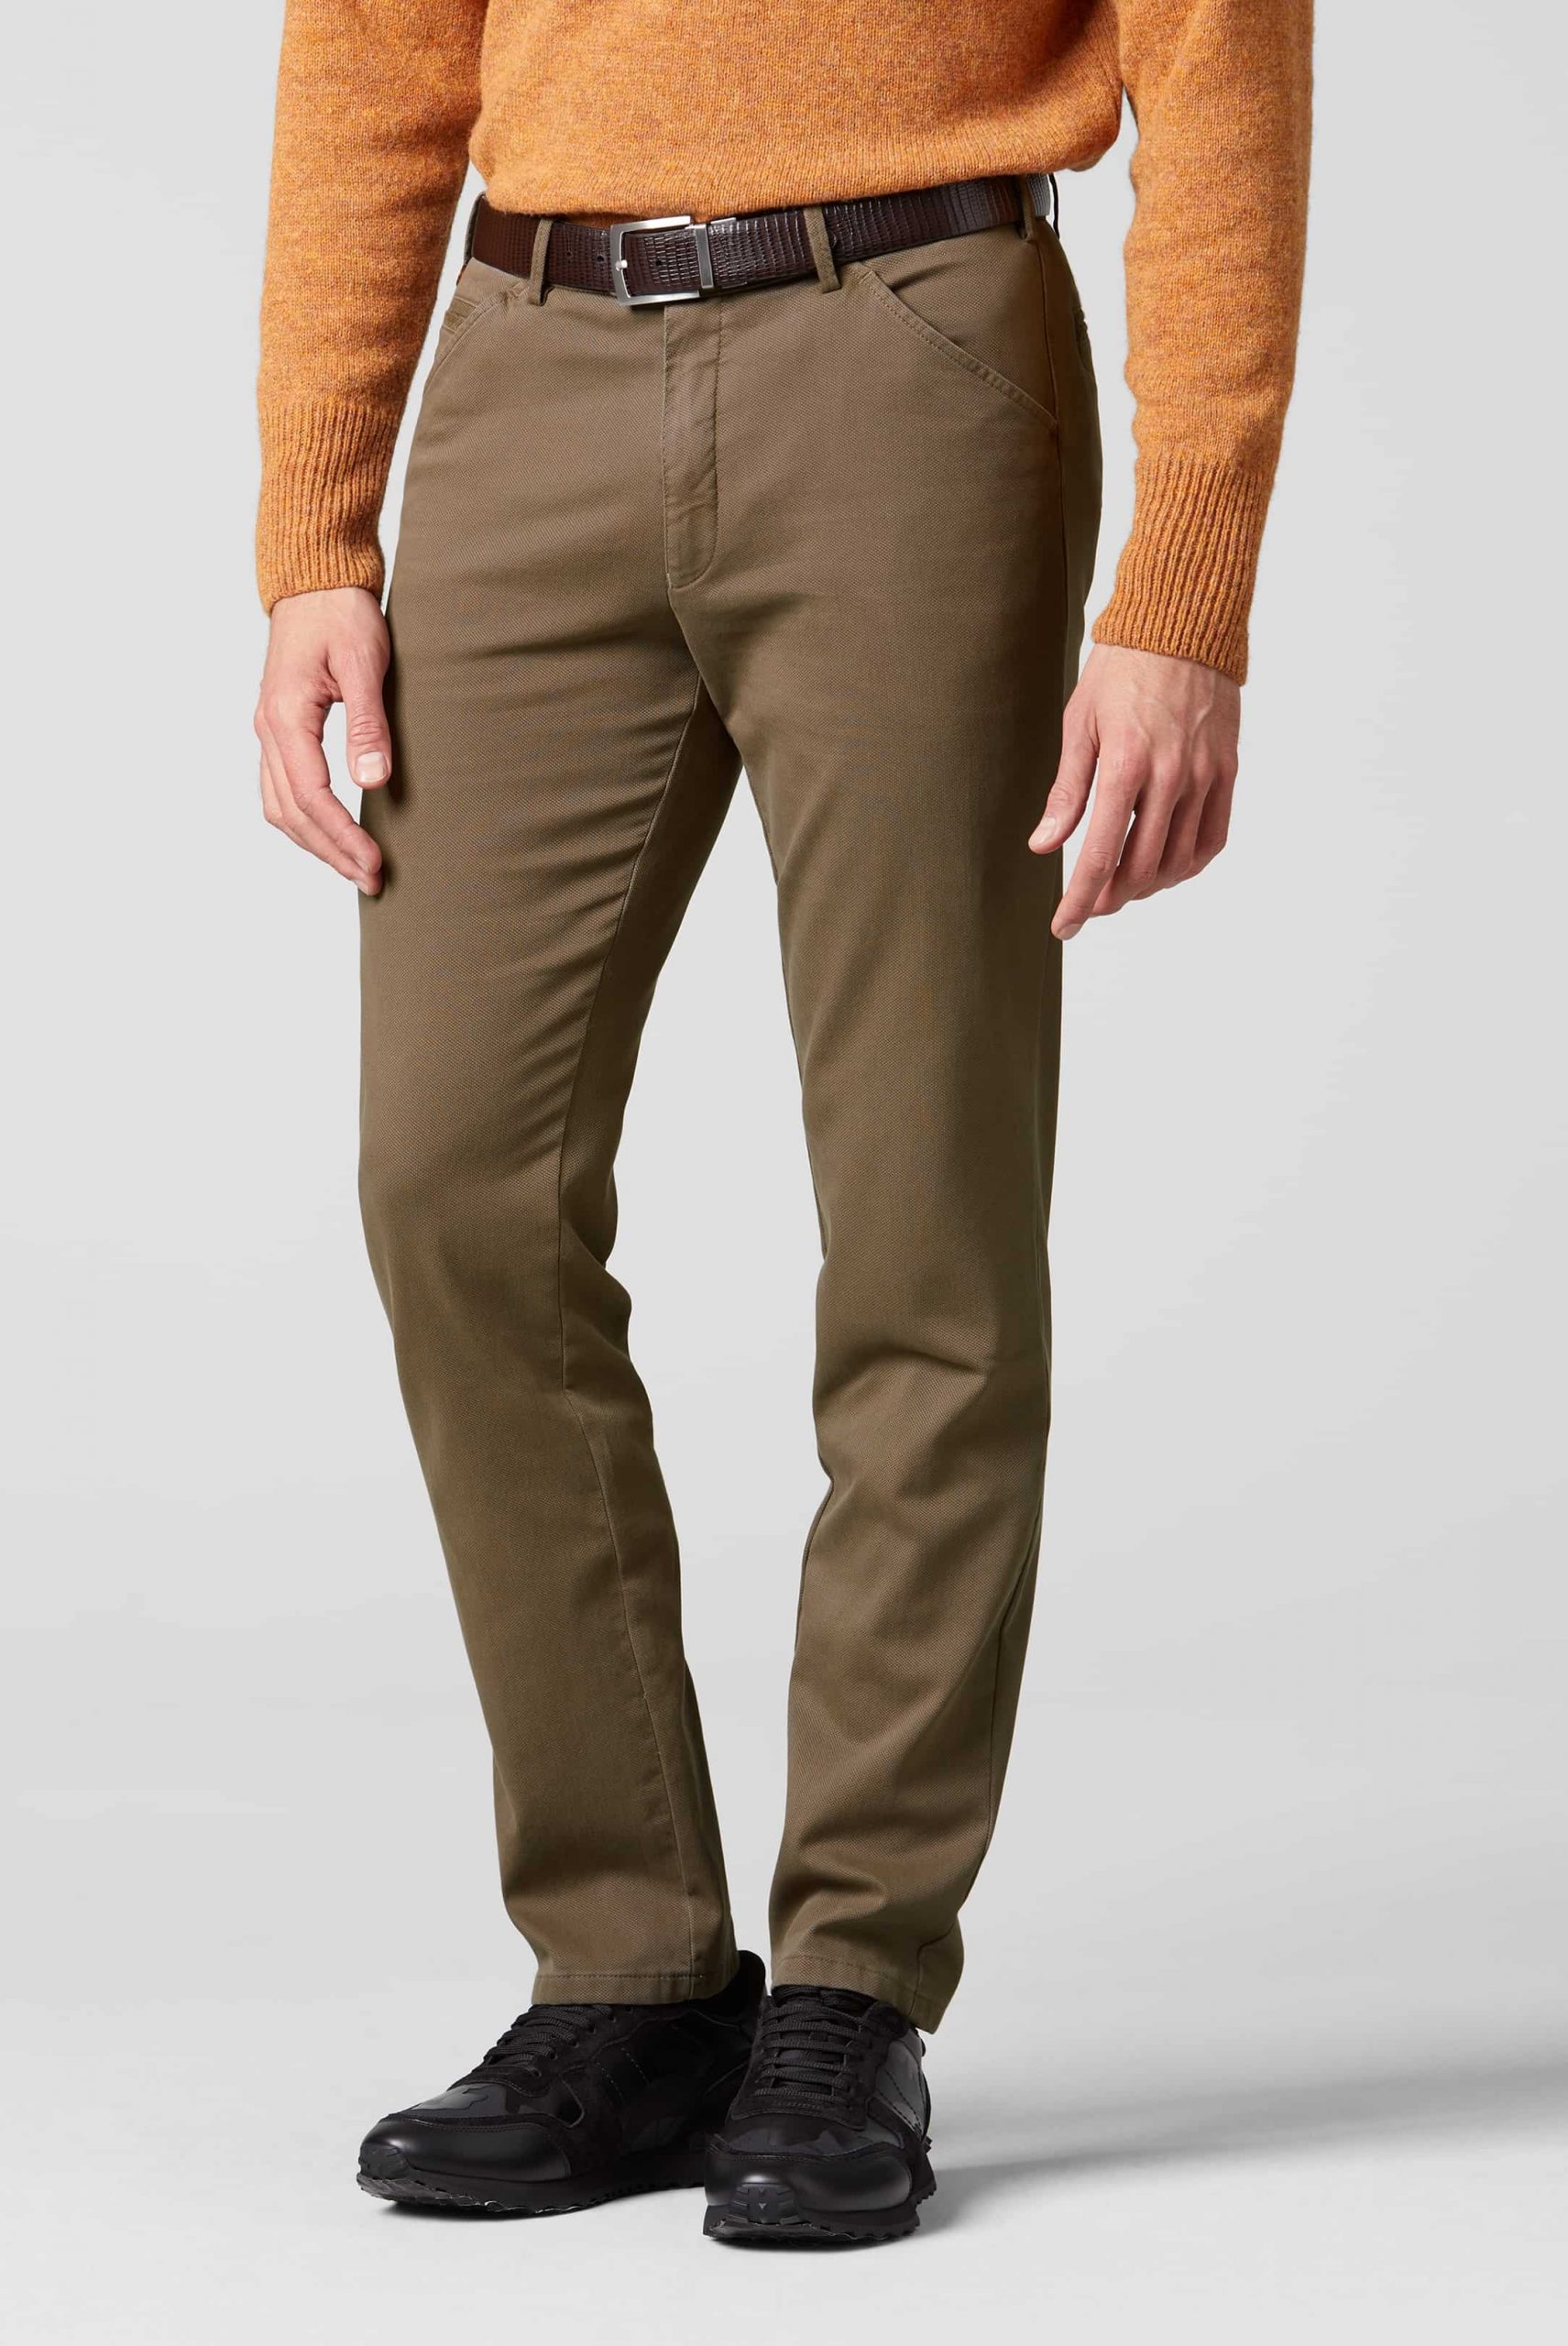 Canvas Look Chicago Chino (2-5580) - First For Men